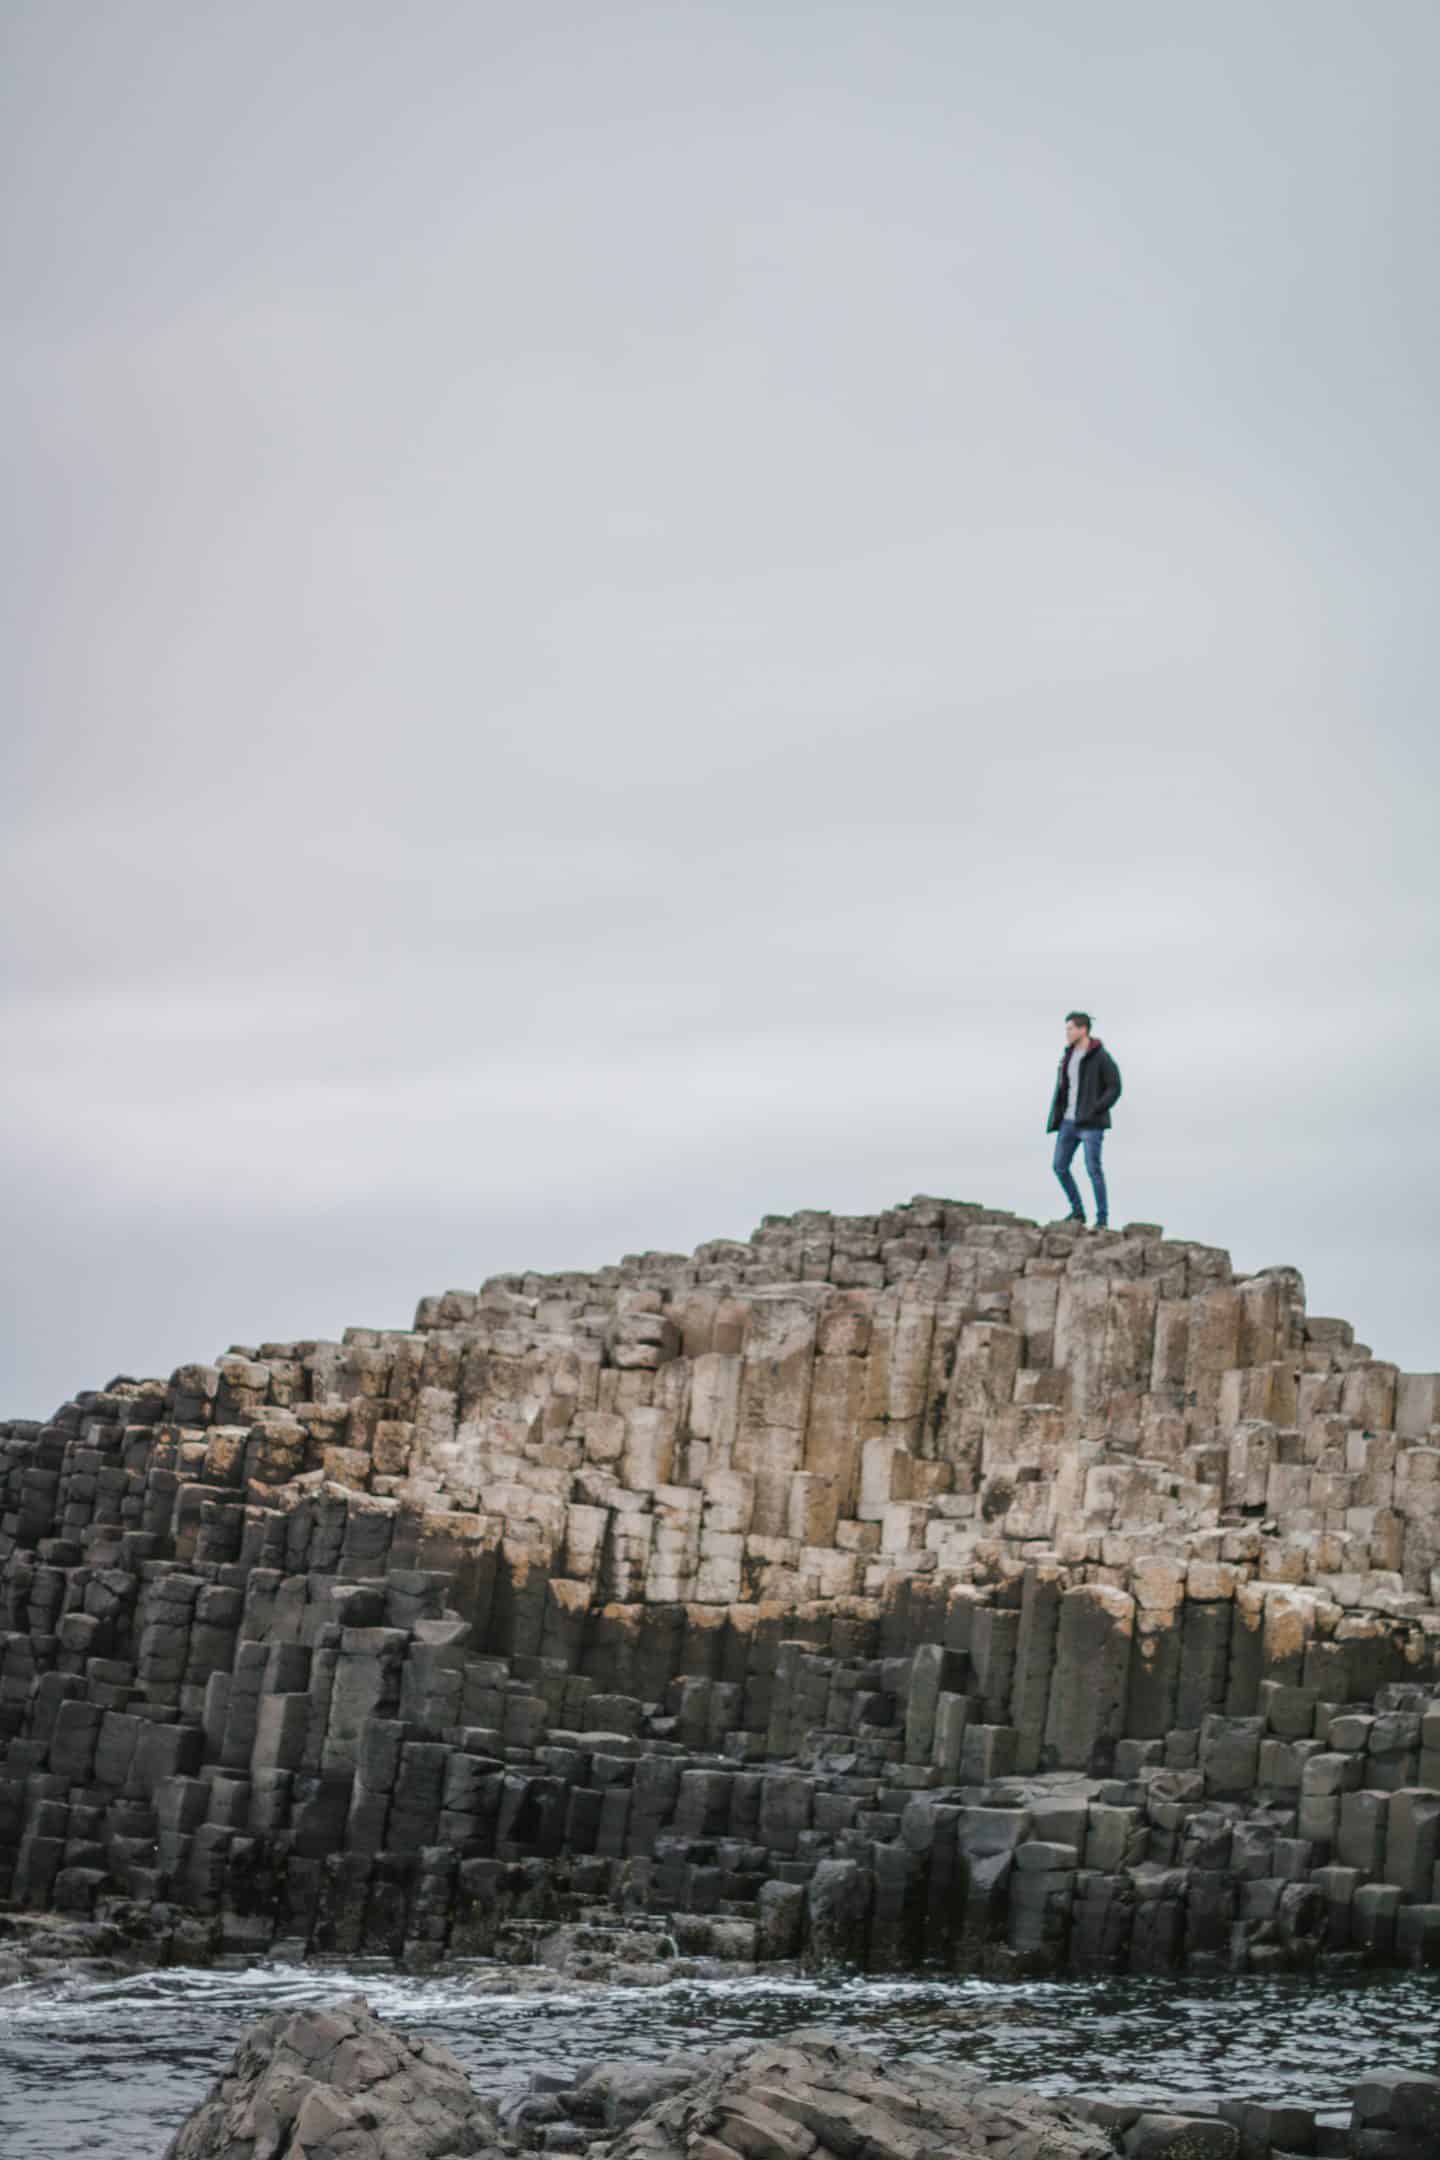 The Giant's Causeway is worth stopping along your Ireland road trip itinerary